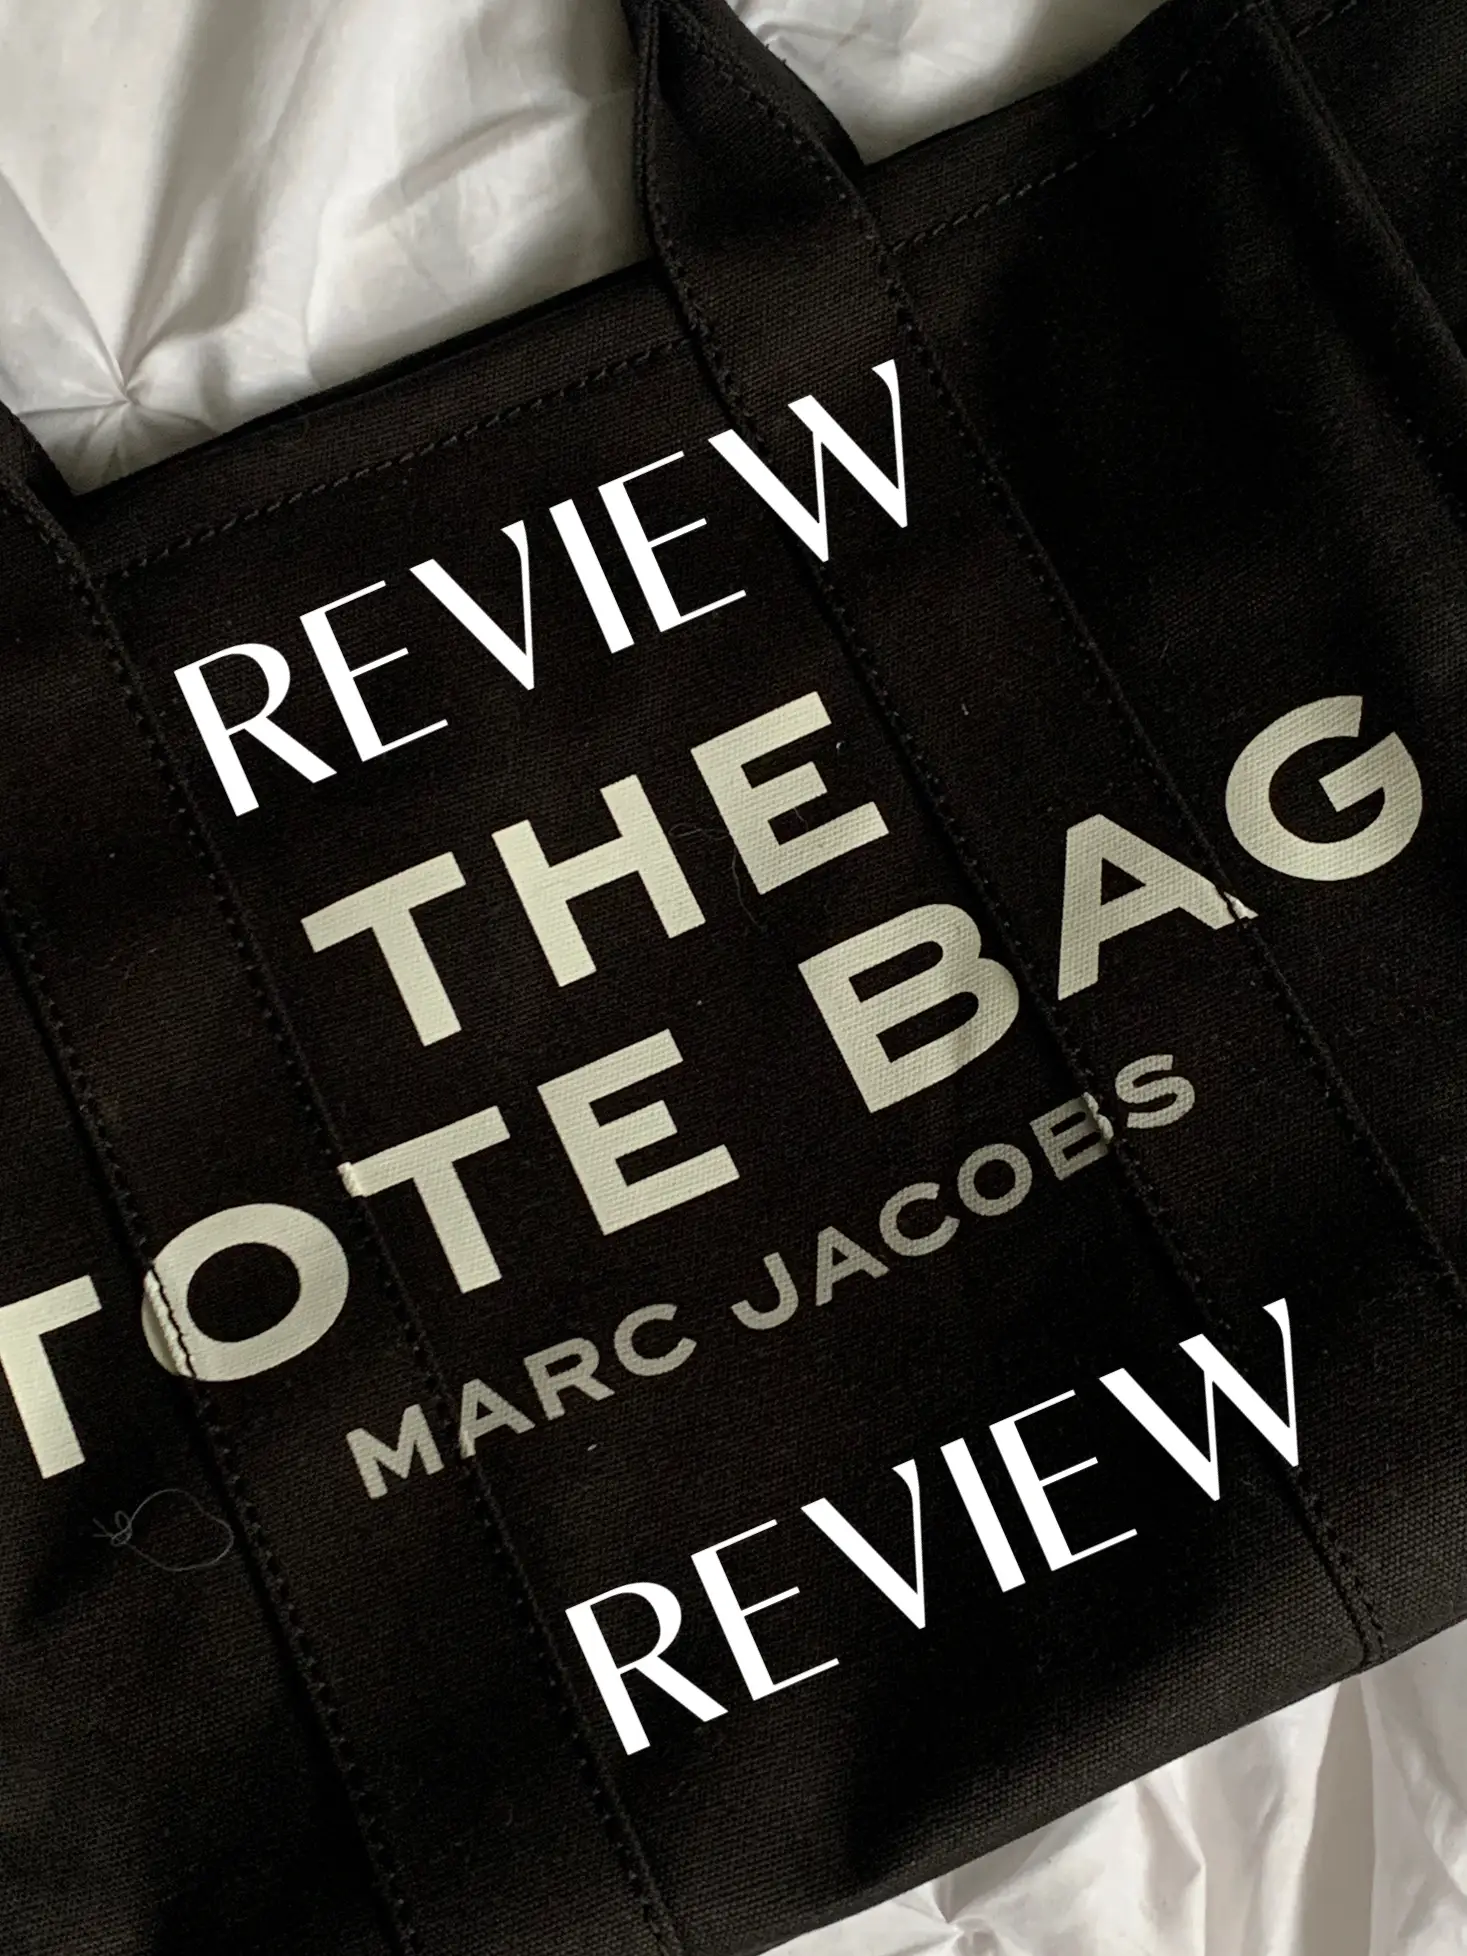 The viral marc jacobs “ the tote bag “ honest review large and medium , Marc Jacobs Tote Bag